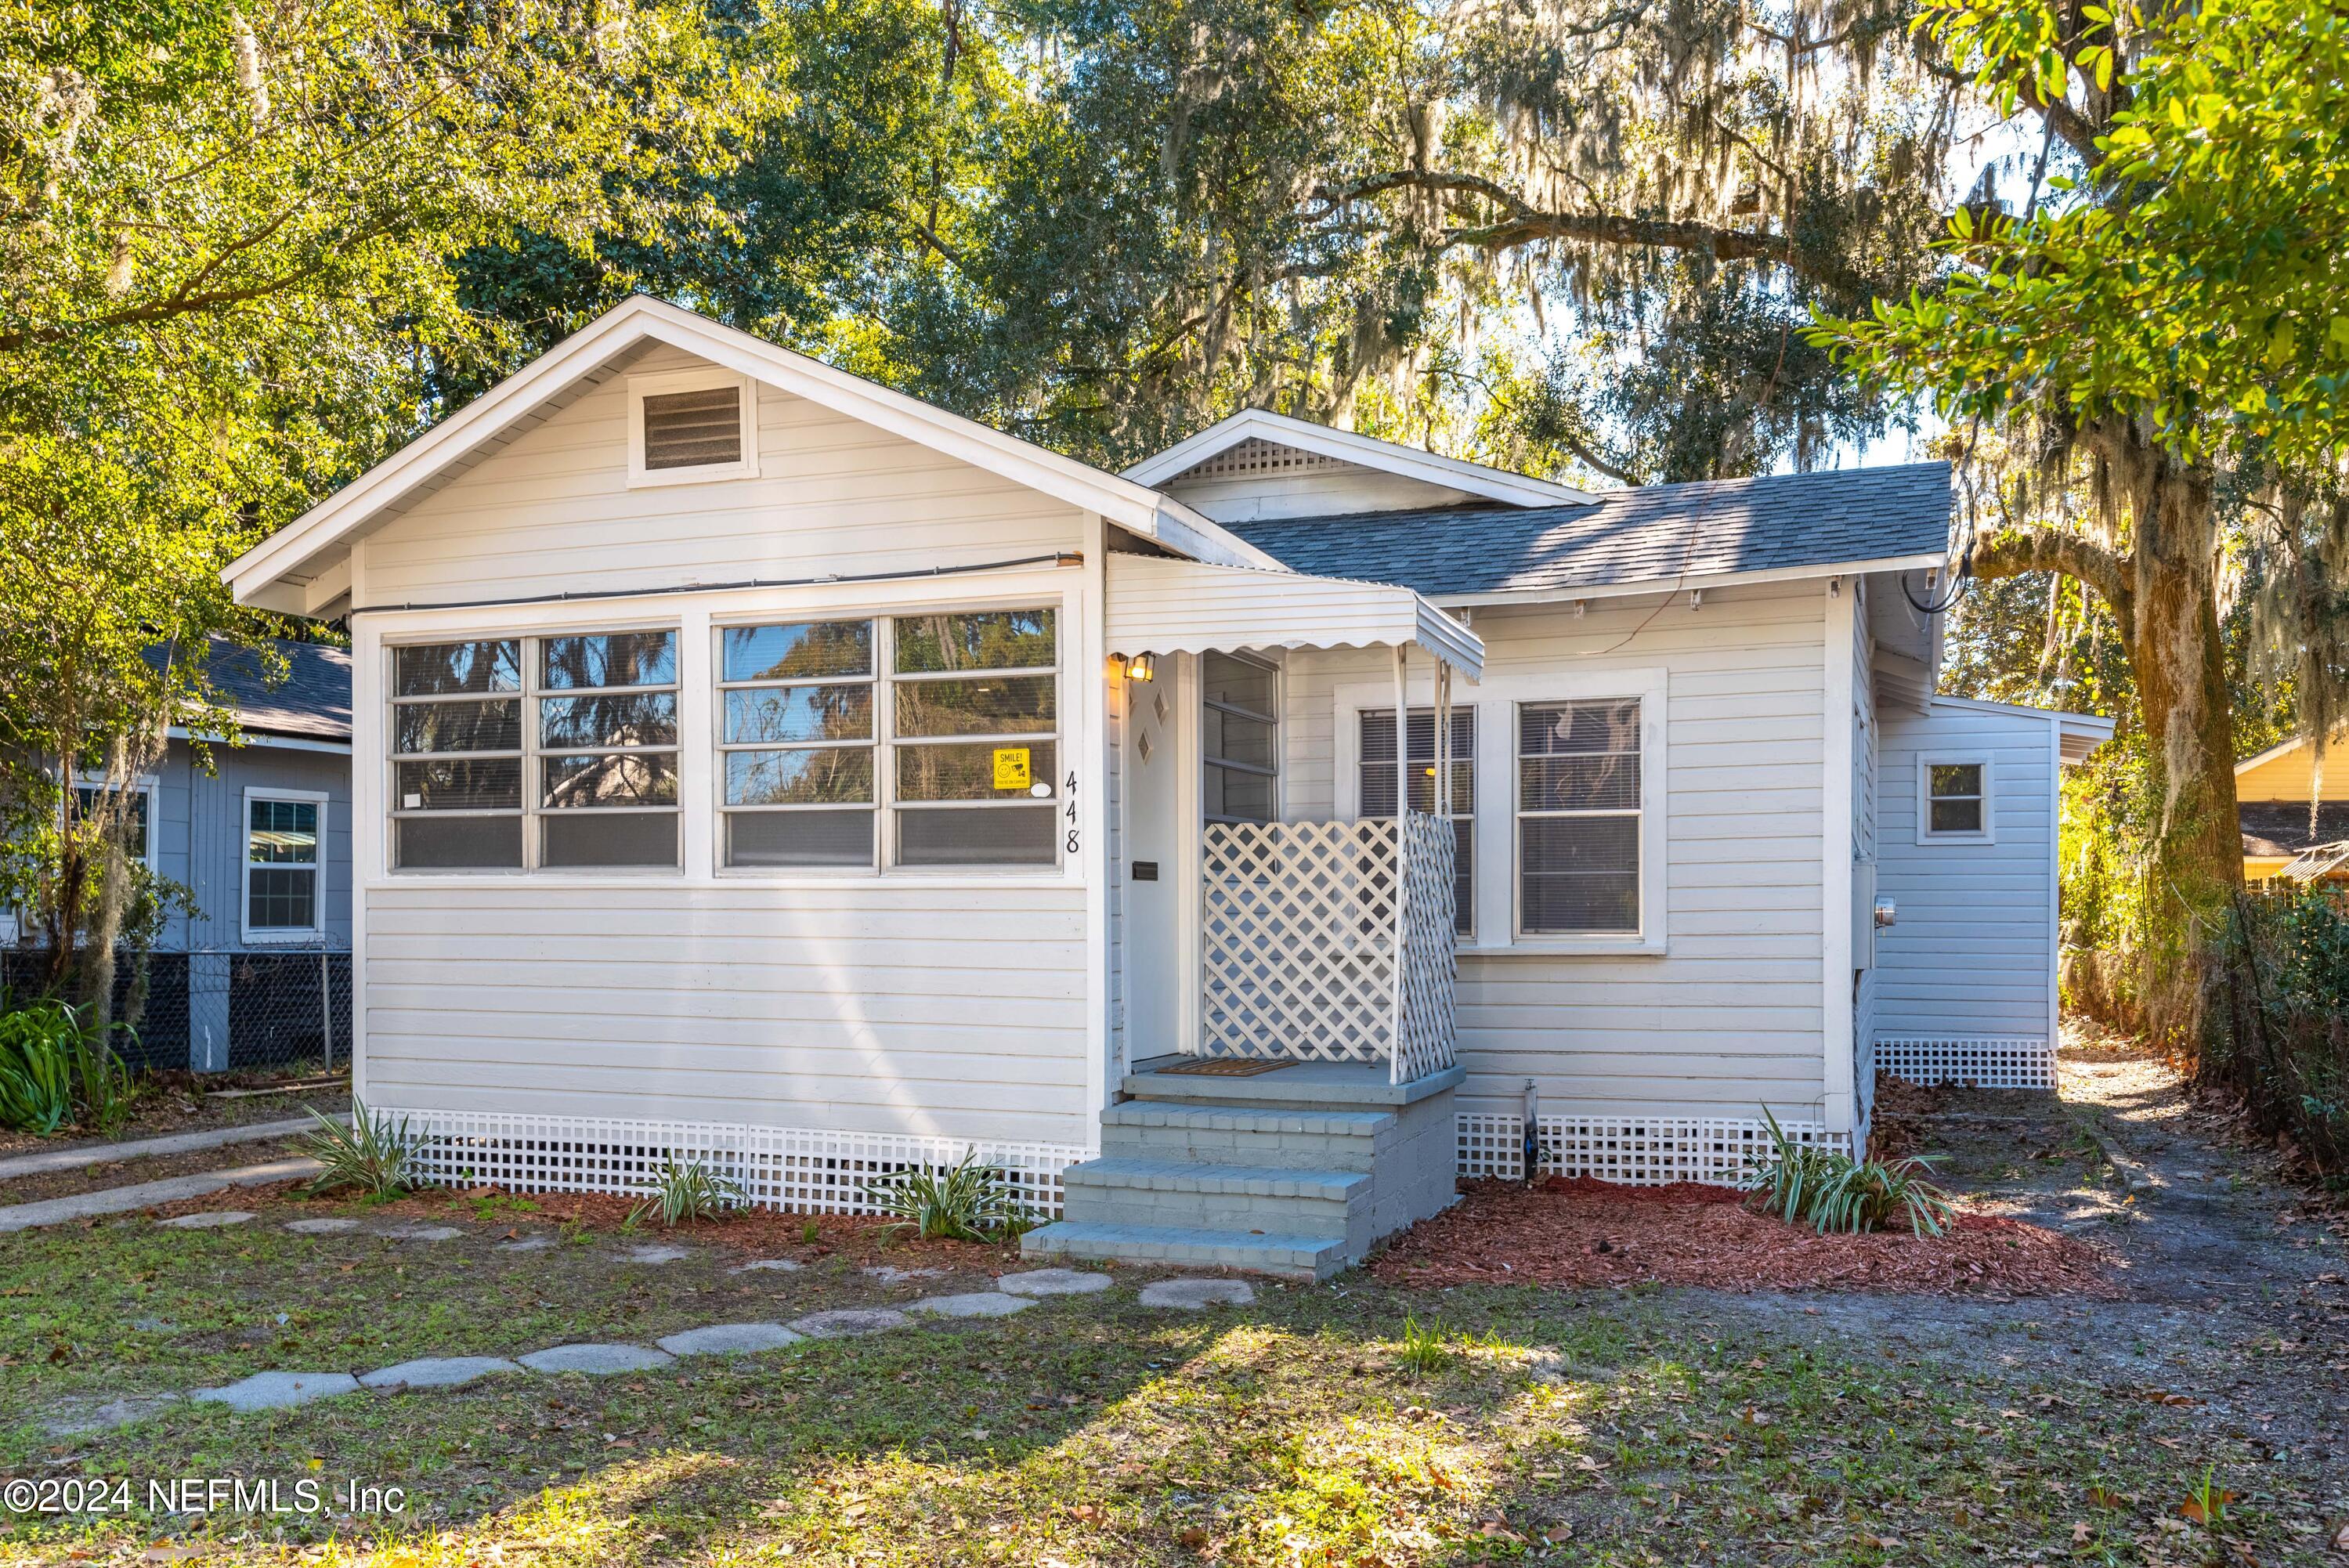 Jacksonville, FL home for sale located at 448 W 60th Street, Jacksonville, FL 32208